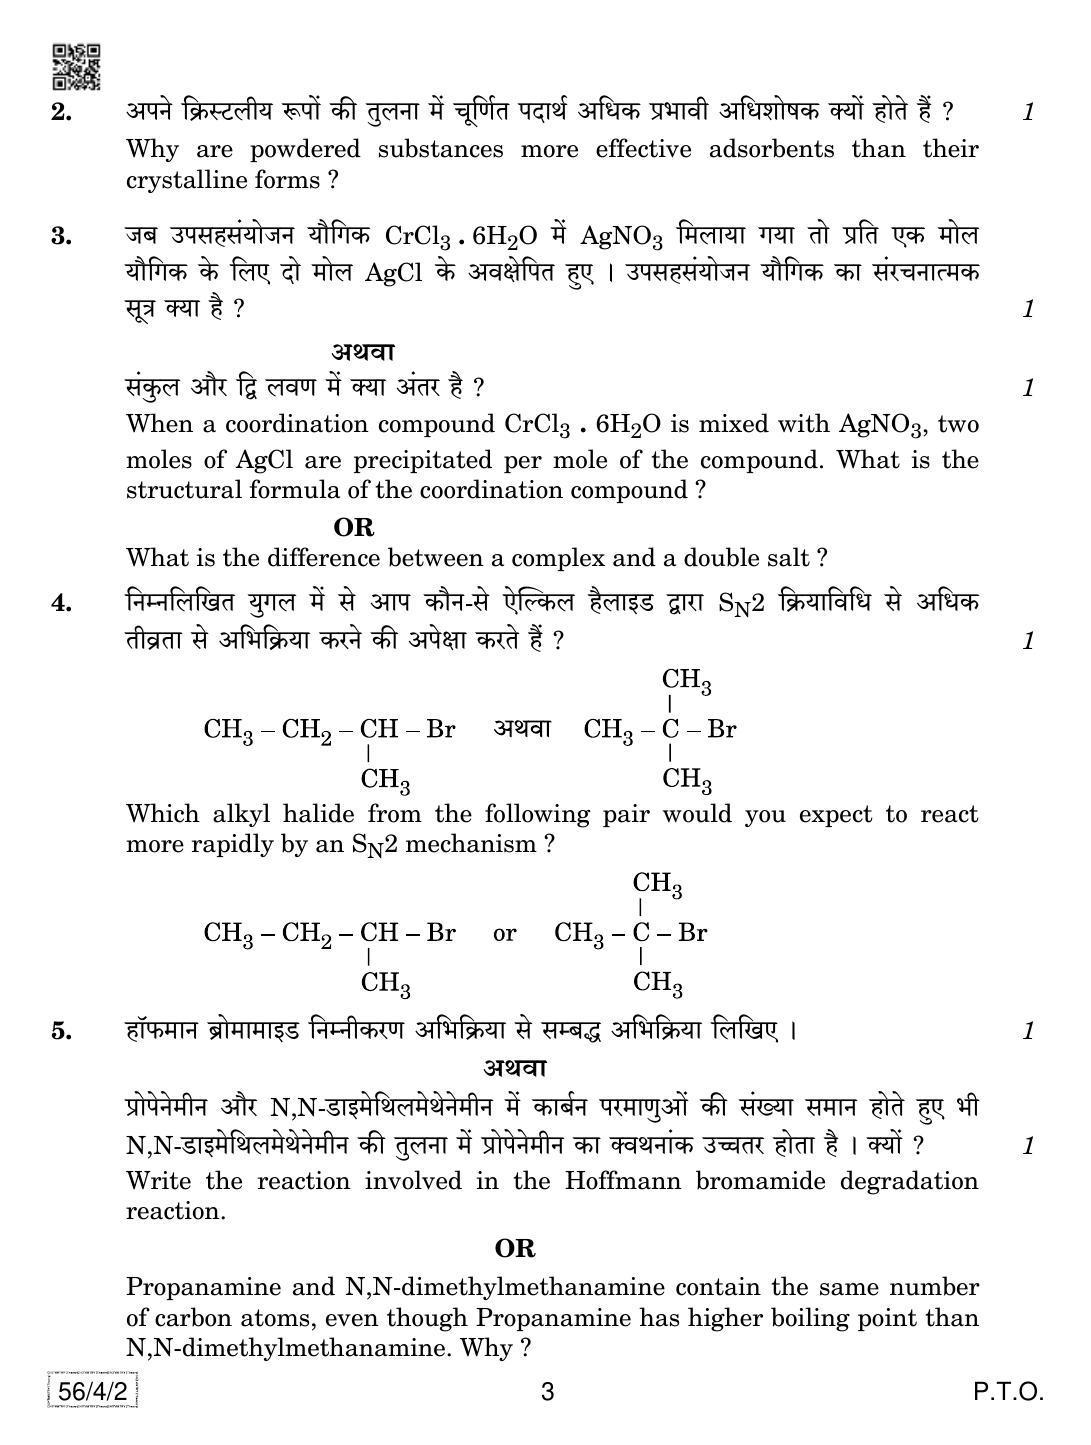 CBSE Class 12 56-4-2 Chemistry 2019 Question Paper - Page 3